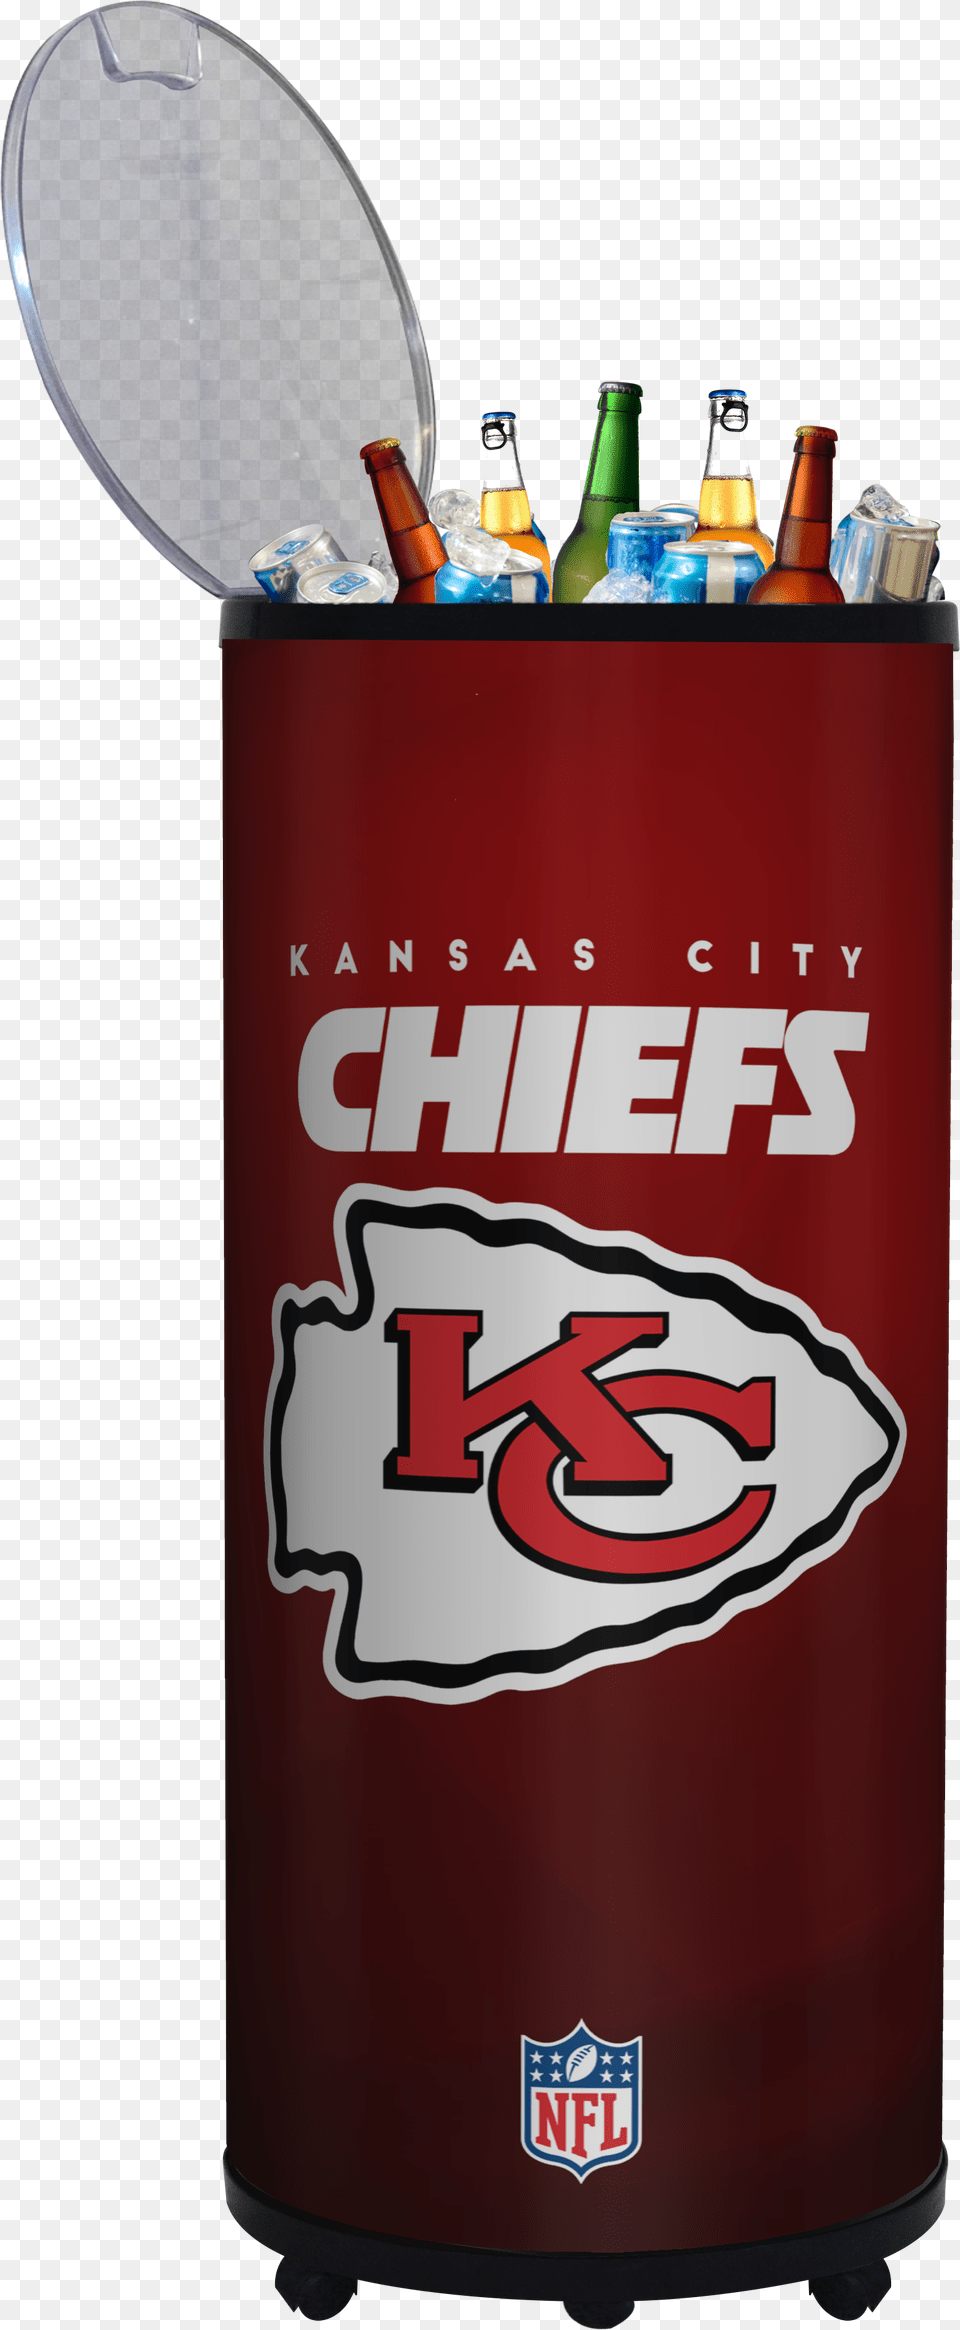 Kansas City Chiefs 5 S Barrel Beverages Drinks, Device, Appliance, Ketchup, Food Free Png Download